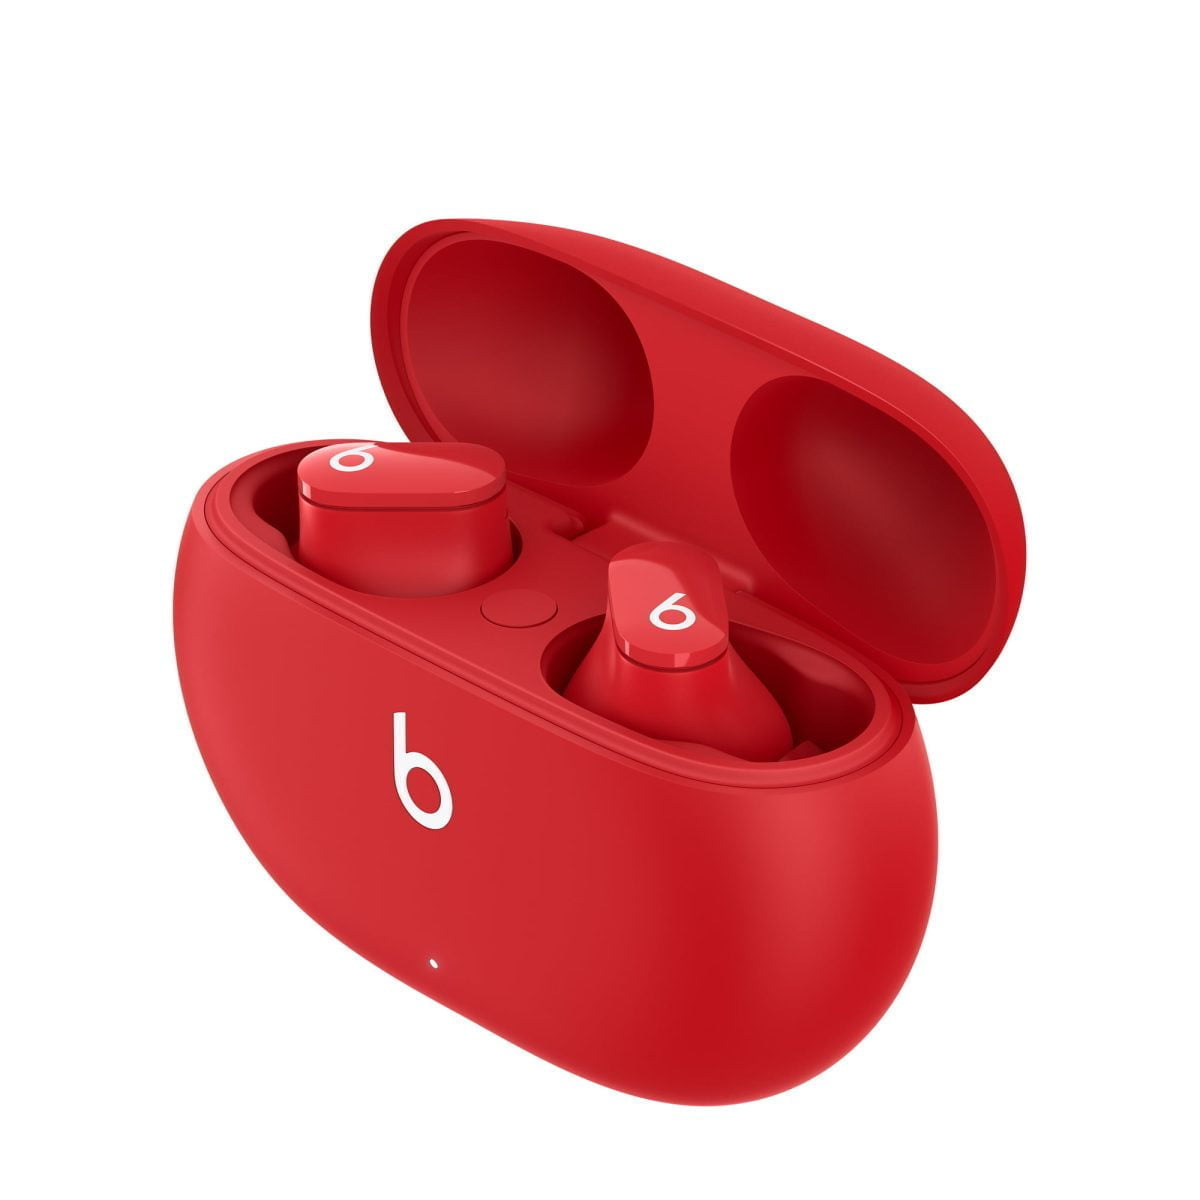 Mj503 Av4 Apple &Lt;H1 Data-Autom=&Quot;Sectiontitle&Quot;&Gt;Beats Studio Buds – True Wireless Noise Cancelling Earphones – Beats Red&Lt;/H1&Gt; &Lt;Div Class=&Quot;Rc-Pdsection-Mainpanel Column Large-9 Small-12&Quot;&Gt; &Lt;Div Class=&Quot;Para-List&Quot;&Gt; Custom Acoustic Platform Delivers Powerful, Balanced Sound &Lt;/Div&Gt; &Lt;Div Class=&Quot;Para-List&Quot;&Gt; Active Noise Cancelling (Anc) Blocks External Noise For Immersive Listening &Lt;/Div&Gt; &Lt;Div Class=&Quot;Para-List&Quot;&Gt; Easily Switch To Transparency Mode To Hear The World Around You &Lt;/Div&Gt; &Lt;Div Class=&Quot;Para-List&Quot;&Gt; Simple One-Touch Pairing For Both Apple&Lt;Sup&Gt;6&Lt;/Sup&Gt; And Android&Lt;Sup&Gt;7&Lt;/Sup&Gt; Devices &Lt;/Div&Gt; &Lt;Div Class=&Quot;Para-List&Quot;&Gt; High-Quality Call Performance And Voice Assistant Interaction Via Dual Beamforming Mics &Lt;/Div&Gt; &Lt;Div Class=&Quot;Para-List&Quot;&Gt; Ipx4-Rated Sweat And Water Resistant Wireless Earbuds&Lt;Sup&Gt;4&Lt;/Sup&Gt; &Lt;/Div&Gt; &Lt;Div Class=&Quot;Para-List&Quot;&Gt; Three Soft Eartip Sizes For A Stable And Comfortable Fit While Ensuring An Optimal Acoustic Seal &Lt;/Div&Gt; &Lt;Div Class=&Quot;Para-List&Quot;&Gt; Up To 8 Hours Of Listening Time&Lt;Sup&Gt;1&Lt;/Sup&Gt; (Up To 24 Hours Combined With Pocket-Sized Charging Case)&Lt;Sup&Gt;2&Lt;/Sup&Gt; &Lt;/Div&Gt; &Lt;Div Class=&Quot;Para-List&Quot;&Gt; Activate Siri Hands-Free Just By Saying “Hey Siri”&Lt;Sup&Gt;8&Lt;/Sup&Gt; &Lt;/Div&Gt; &Lt;Div Class=&Quot;Para-List&Quot;&Gt; Industry-Leading Class 1 Bluetooth For Extended Range And Fewer Dropouts &Lt;/Div&Gt; &Lt;Div Class=&Quot;Para-List As-Pdp-Lastparalist&Quot;&Gt; Usb-C Universal Charging &Lt;/Div&Gt; &Lt;/Div&Gt; Beats Studio Buds Red Beats Studio Buds – True Wireless Noise Cancelling Earphones – Beats Red